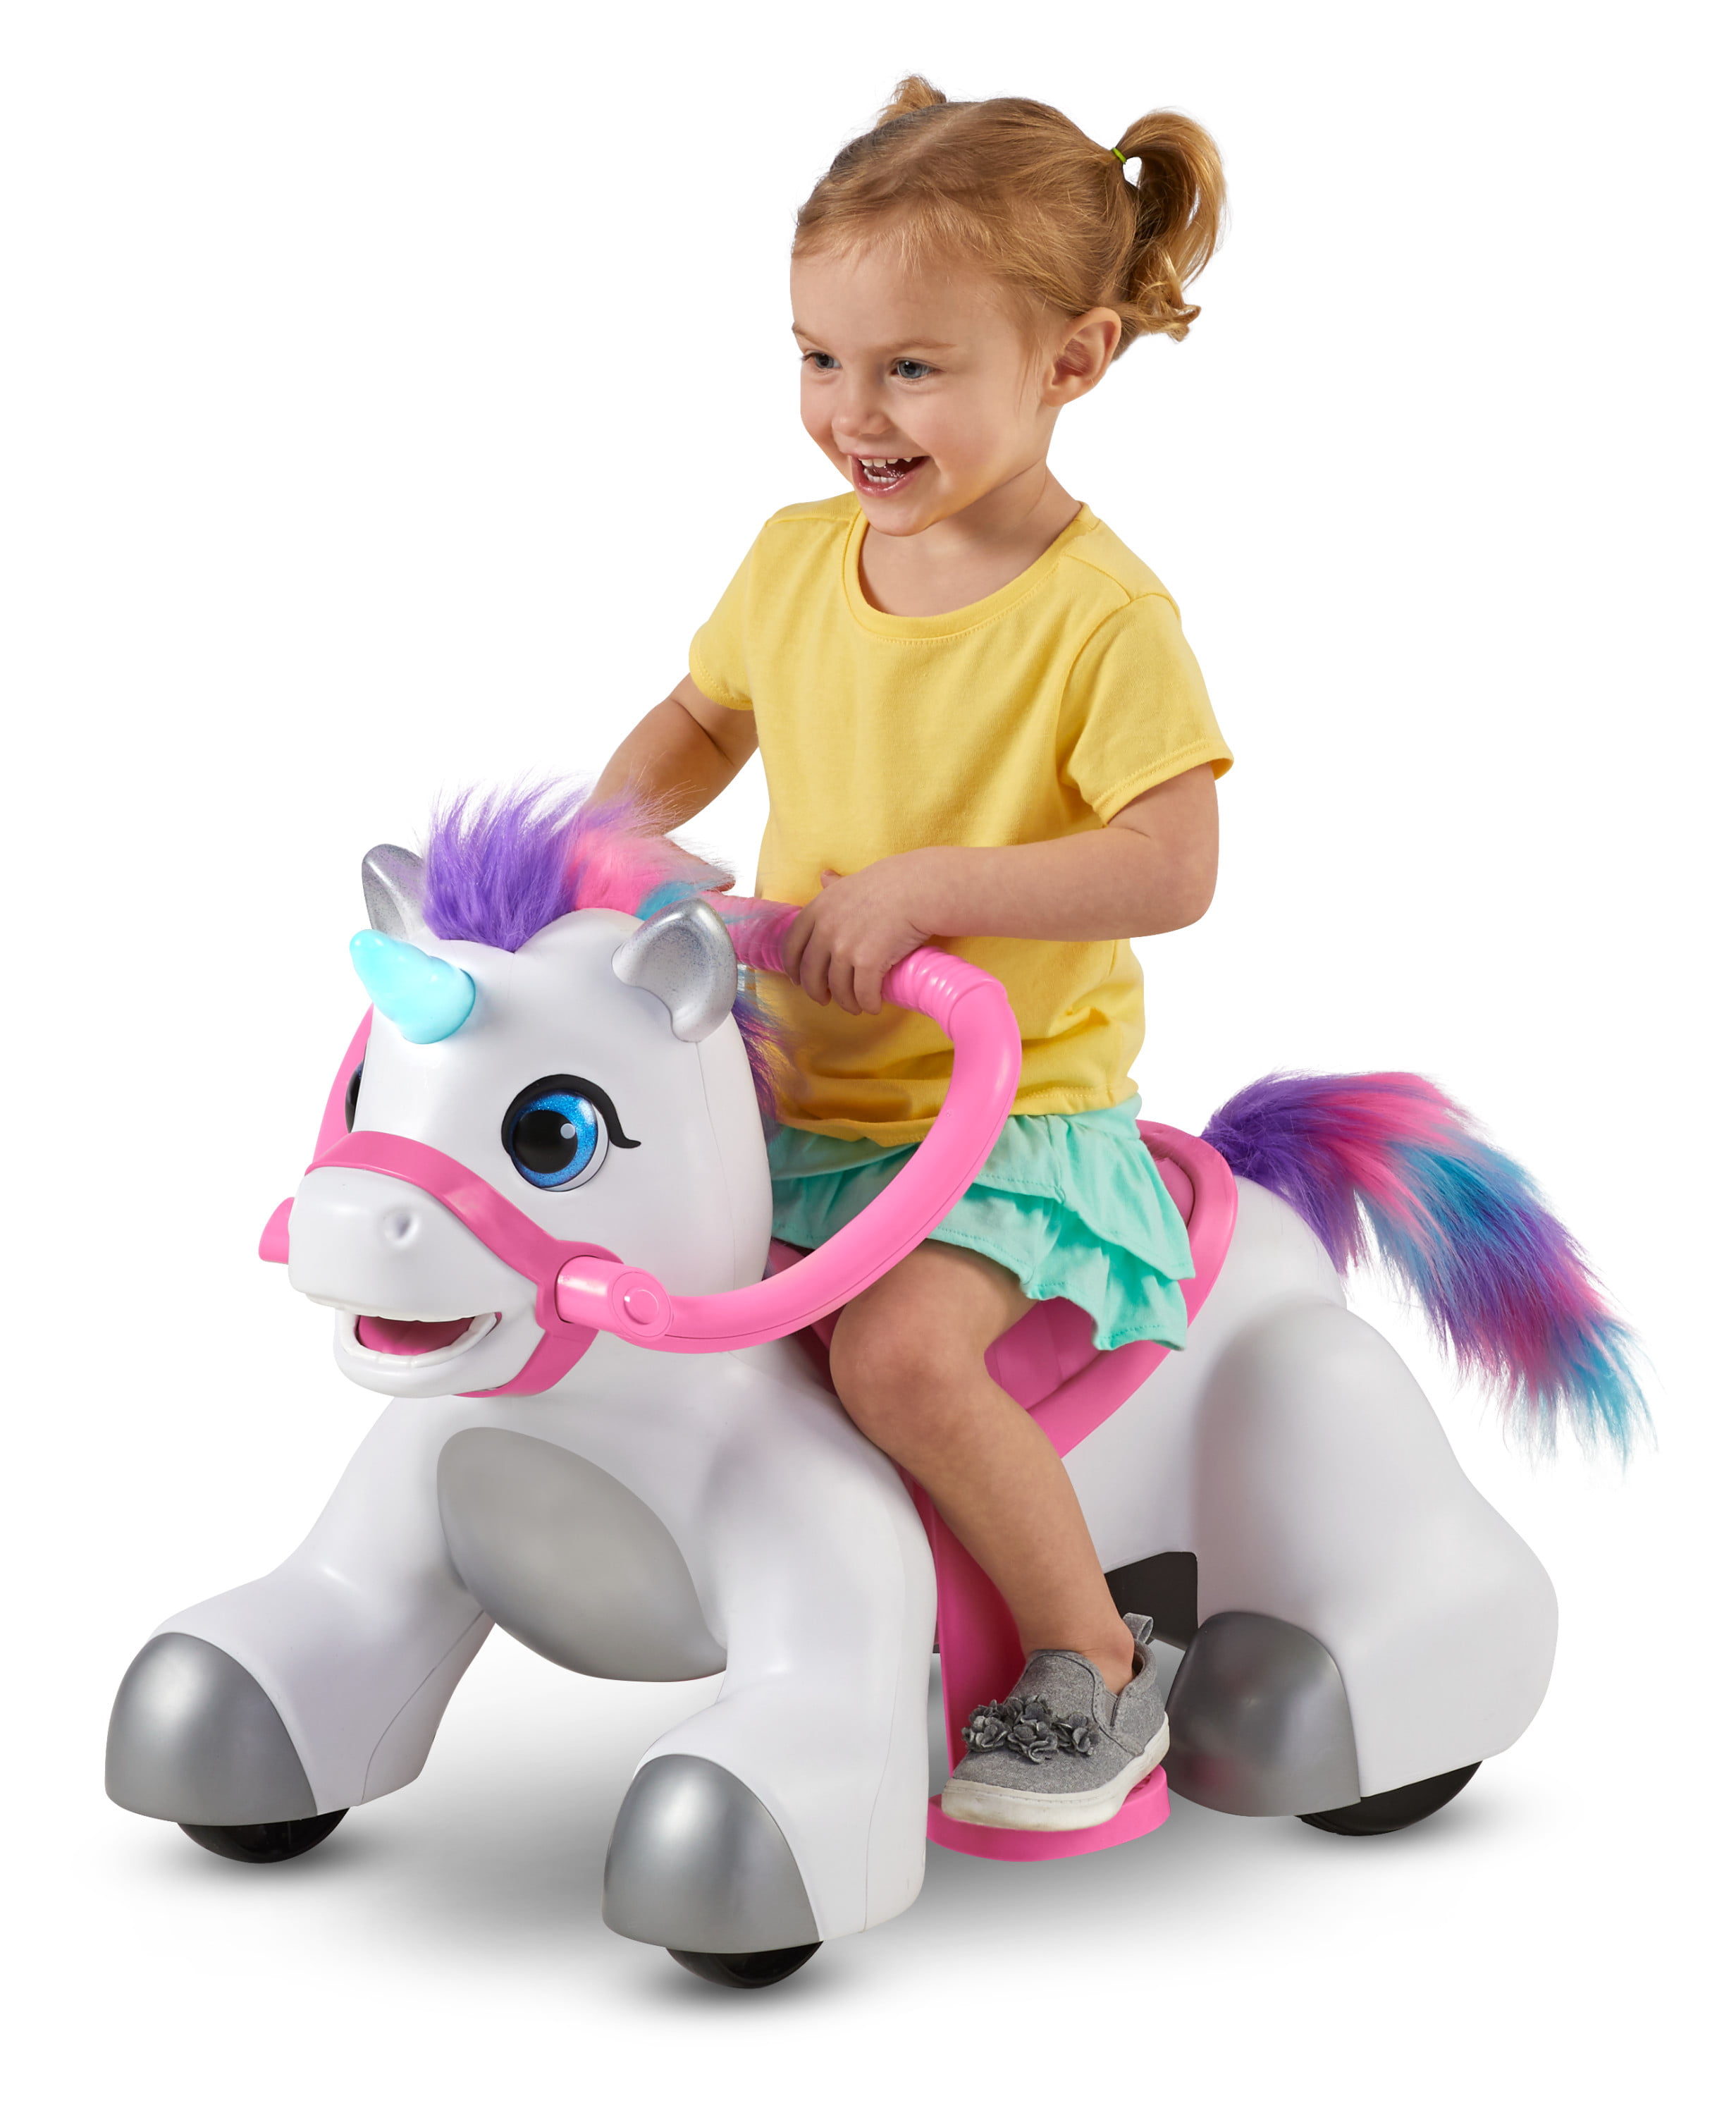 Unicorn Interactive Ride-On Toy For Toddlers Kid With Sounds /& Accessories Sets